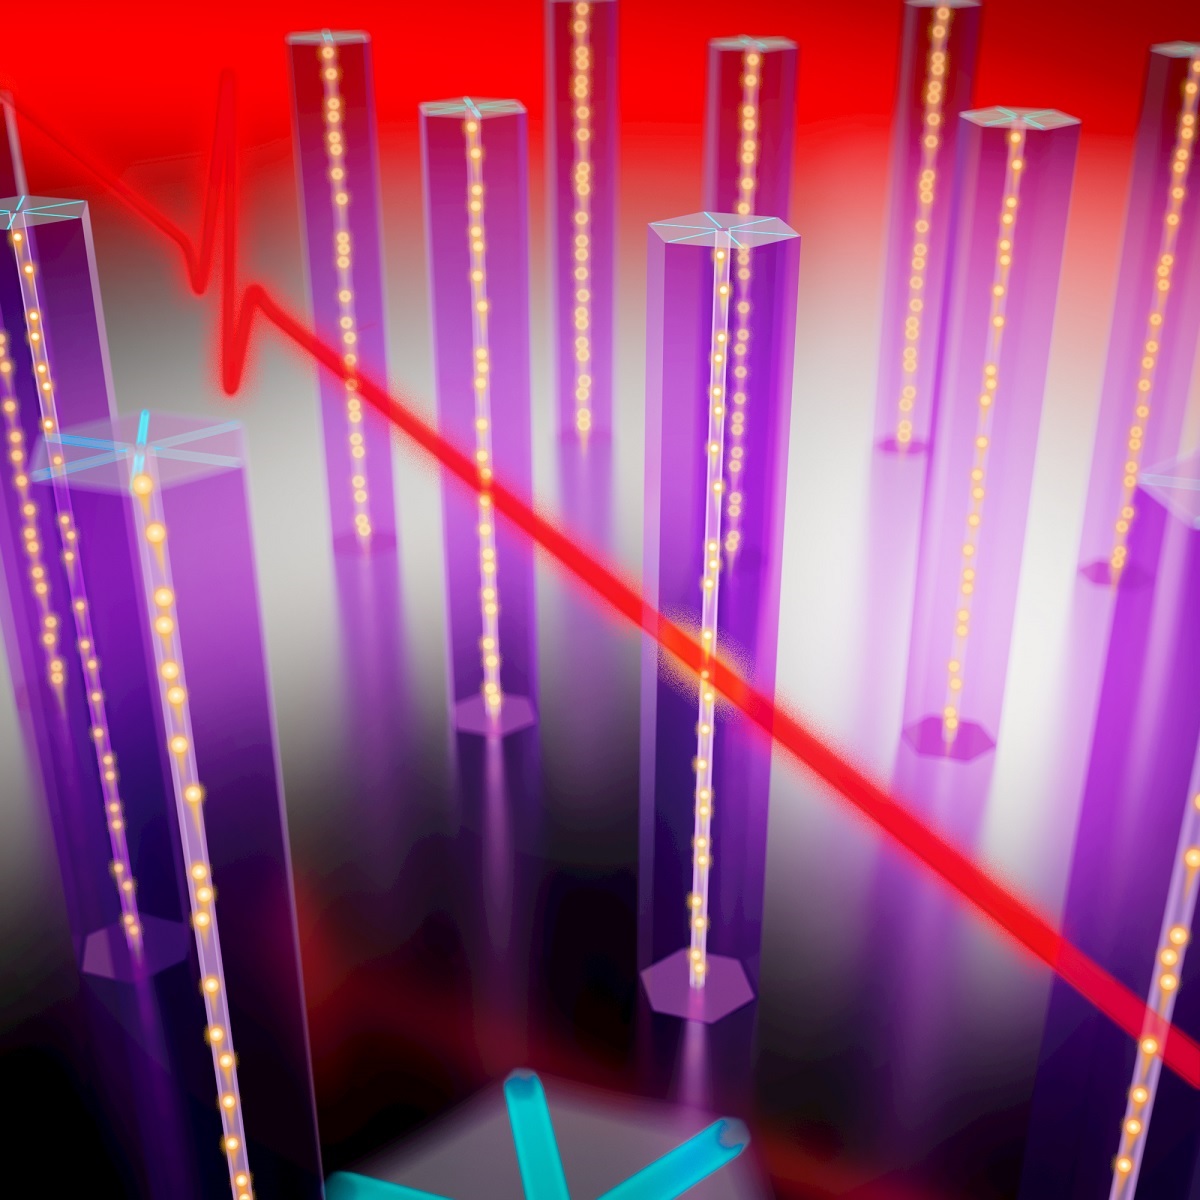 Terahertz spectroscopy measurements showed that the strained core of semiconductor nanowires can host fast moving electrons, a concept that could be employed for a new generation of nano-transistors